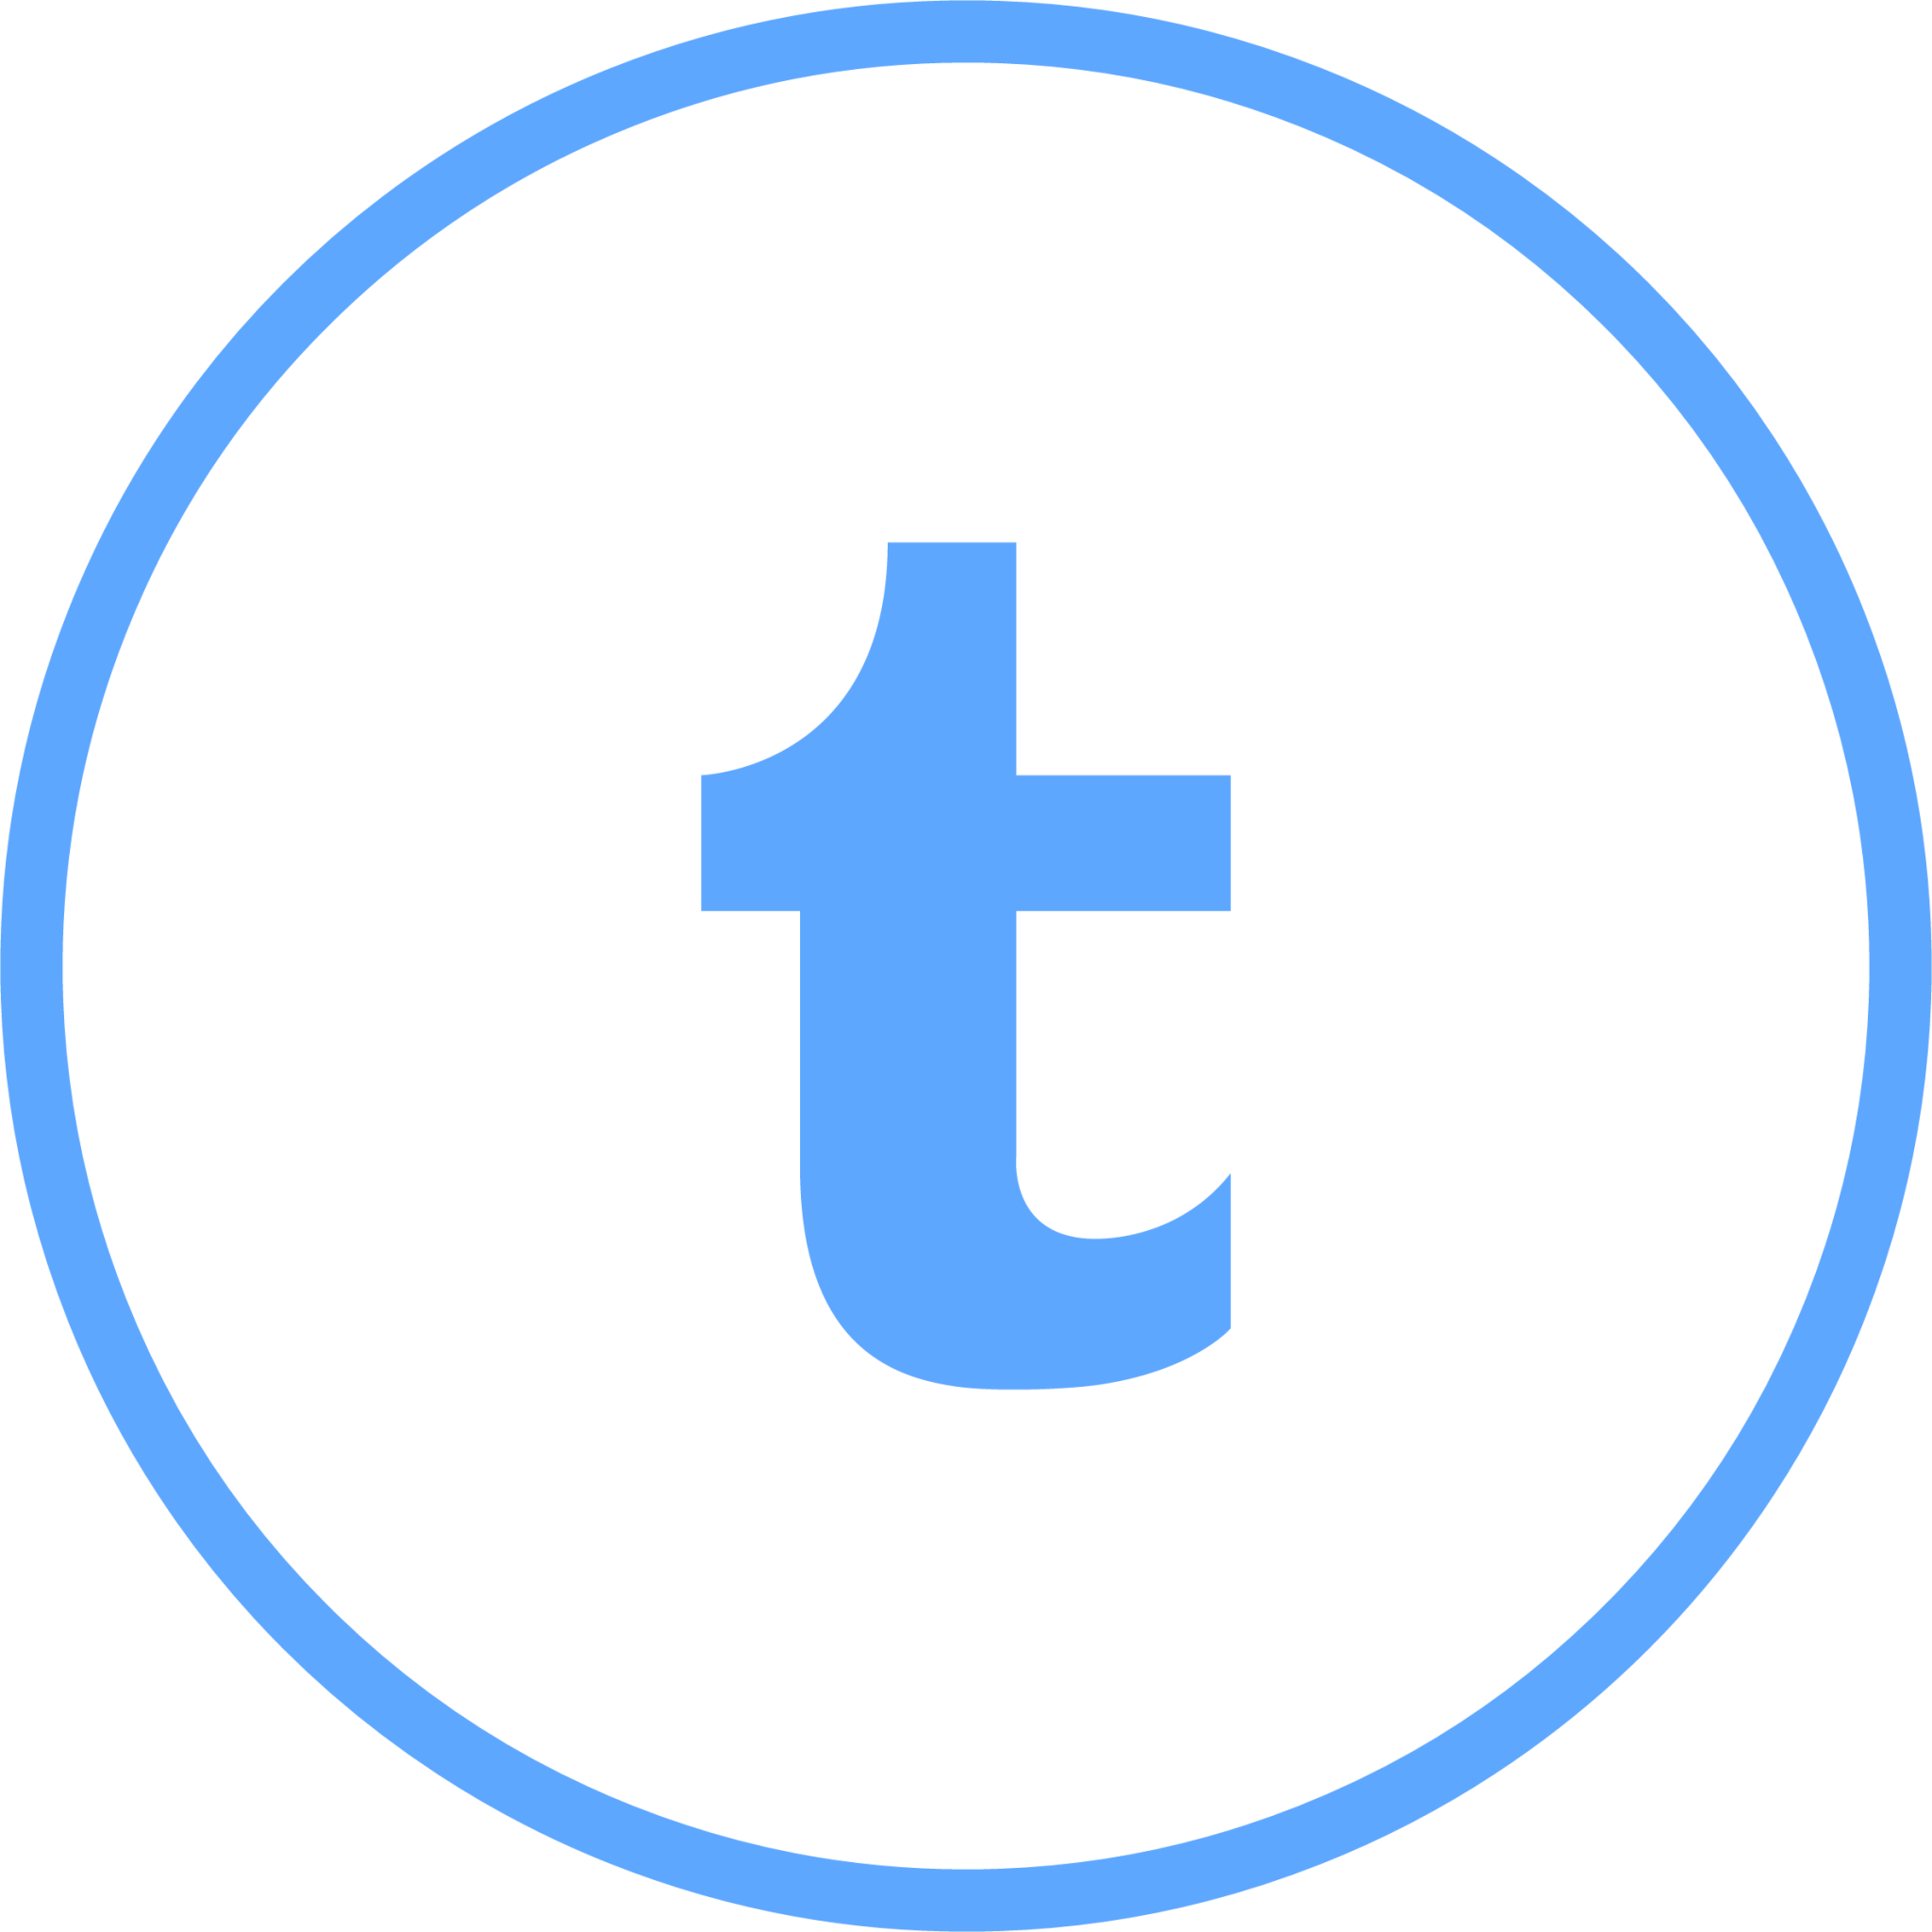 tumblr outlined icon